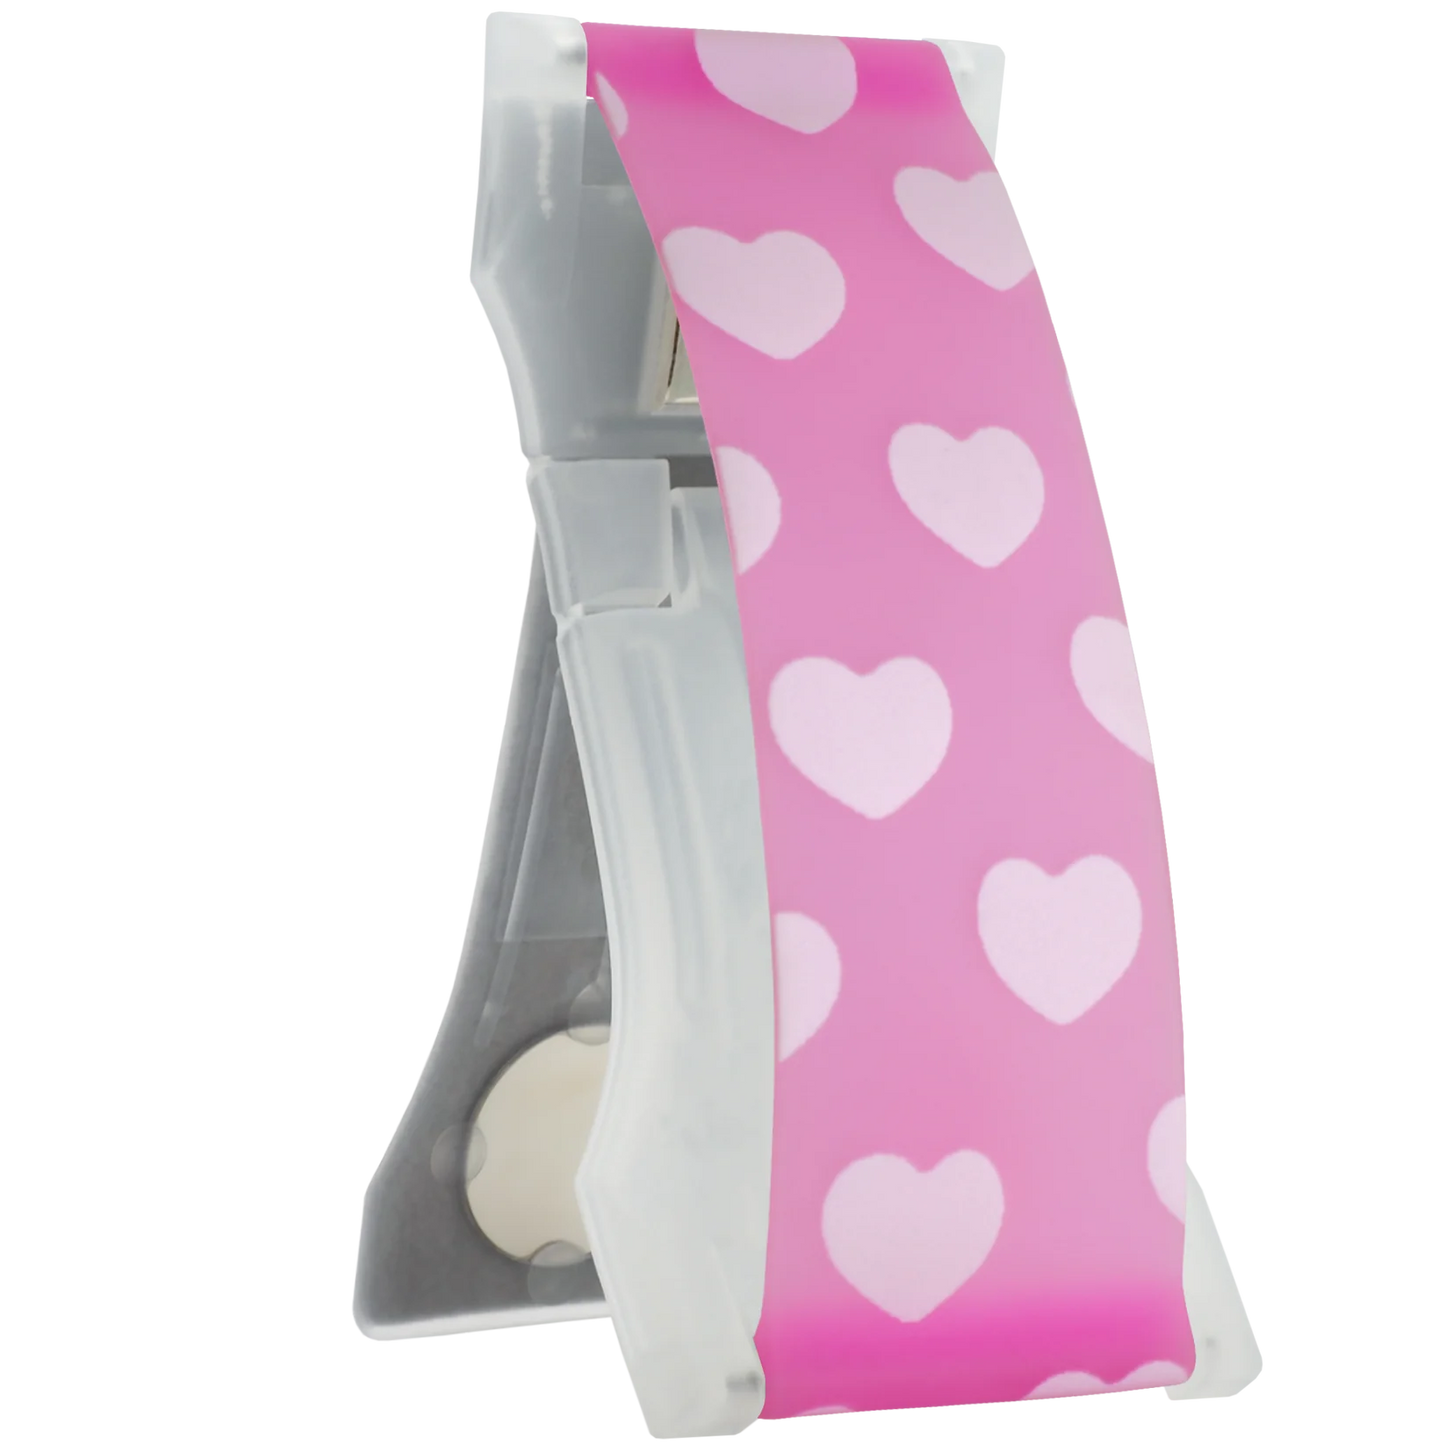 Pink Heart GLOW Silicone LoveHandle Pro Phone Grip